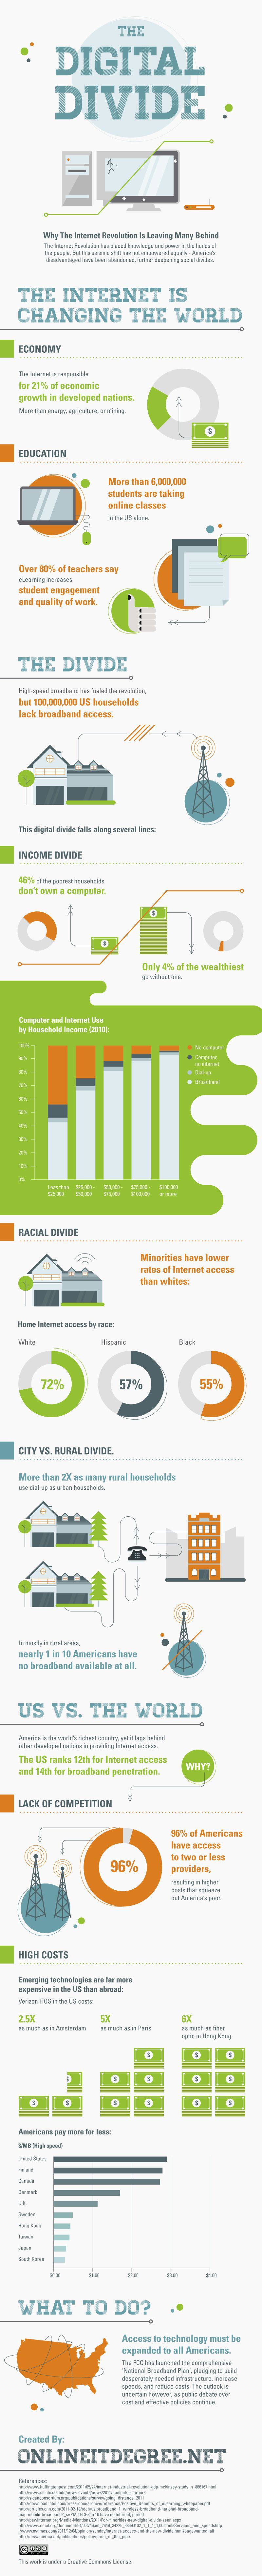 Creative Commons Infographic found on http://mashable.com/2012/02/05/digital-divide-infographic/#LObOhrBhEkqh